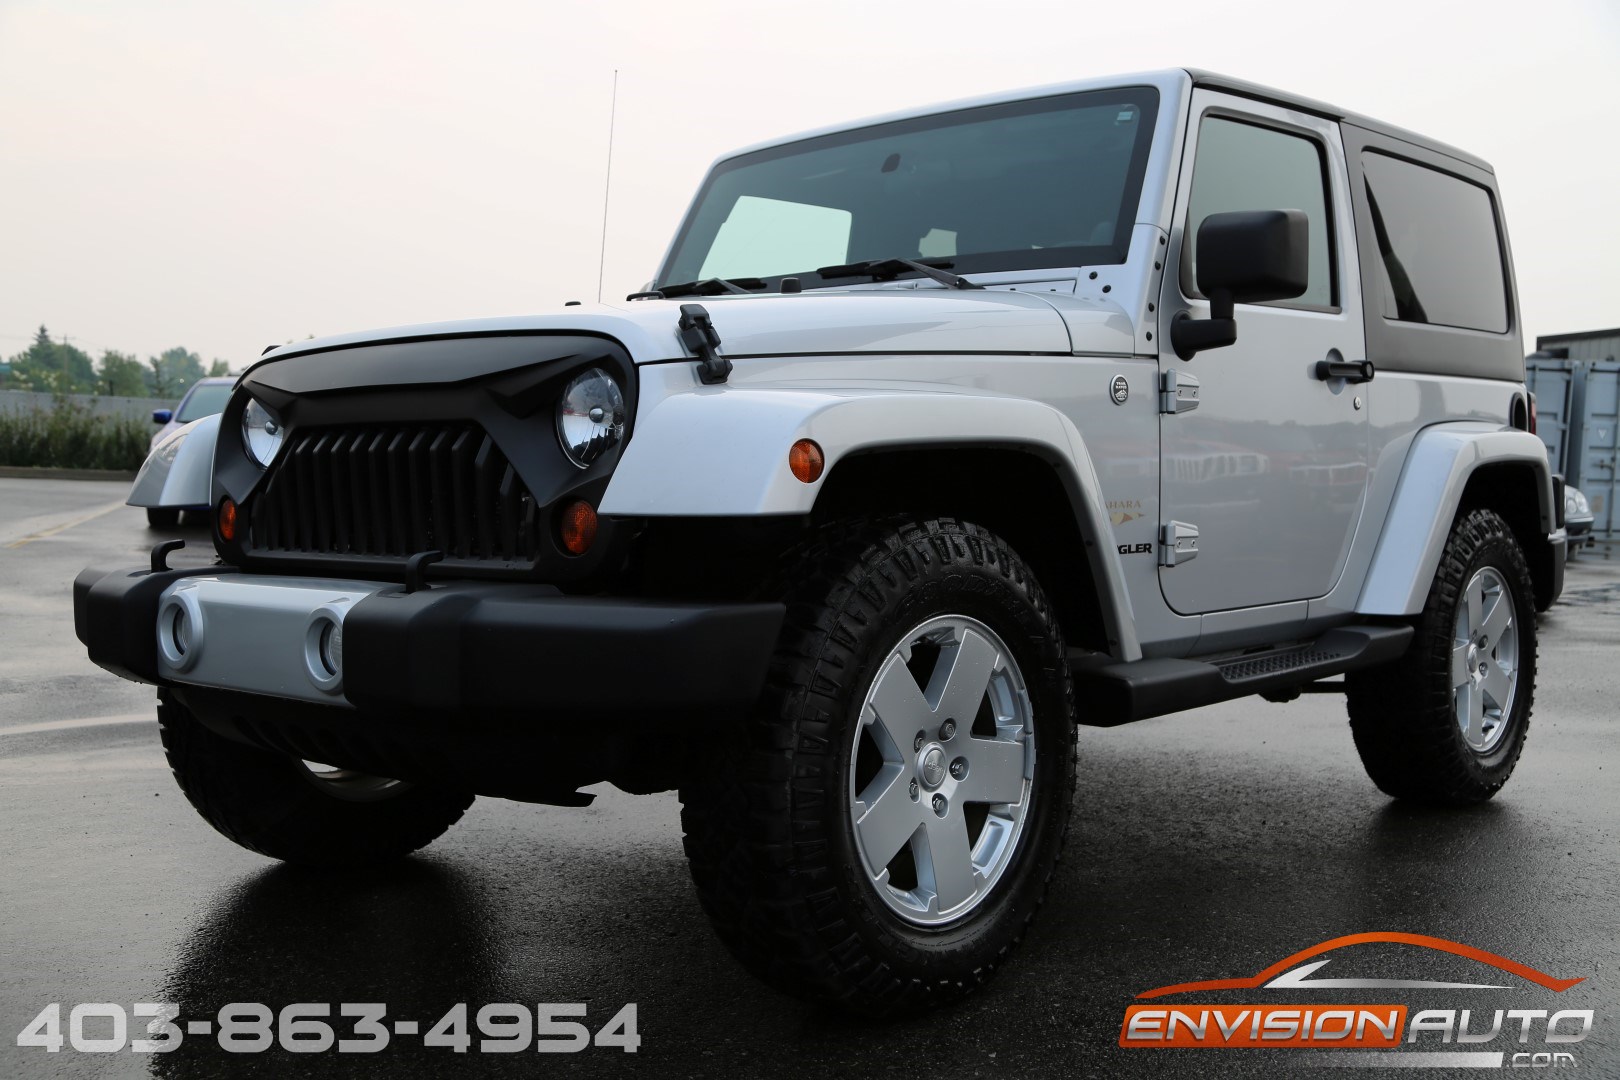 2011 Jeep Wrangler Sahara 2 Door \ 6 Speed Manual \ Only 85,000 KMS! -  Envision Auto